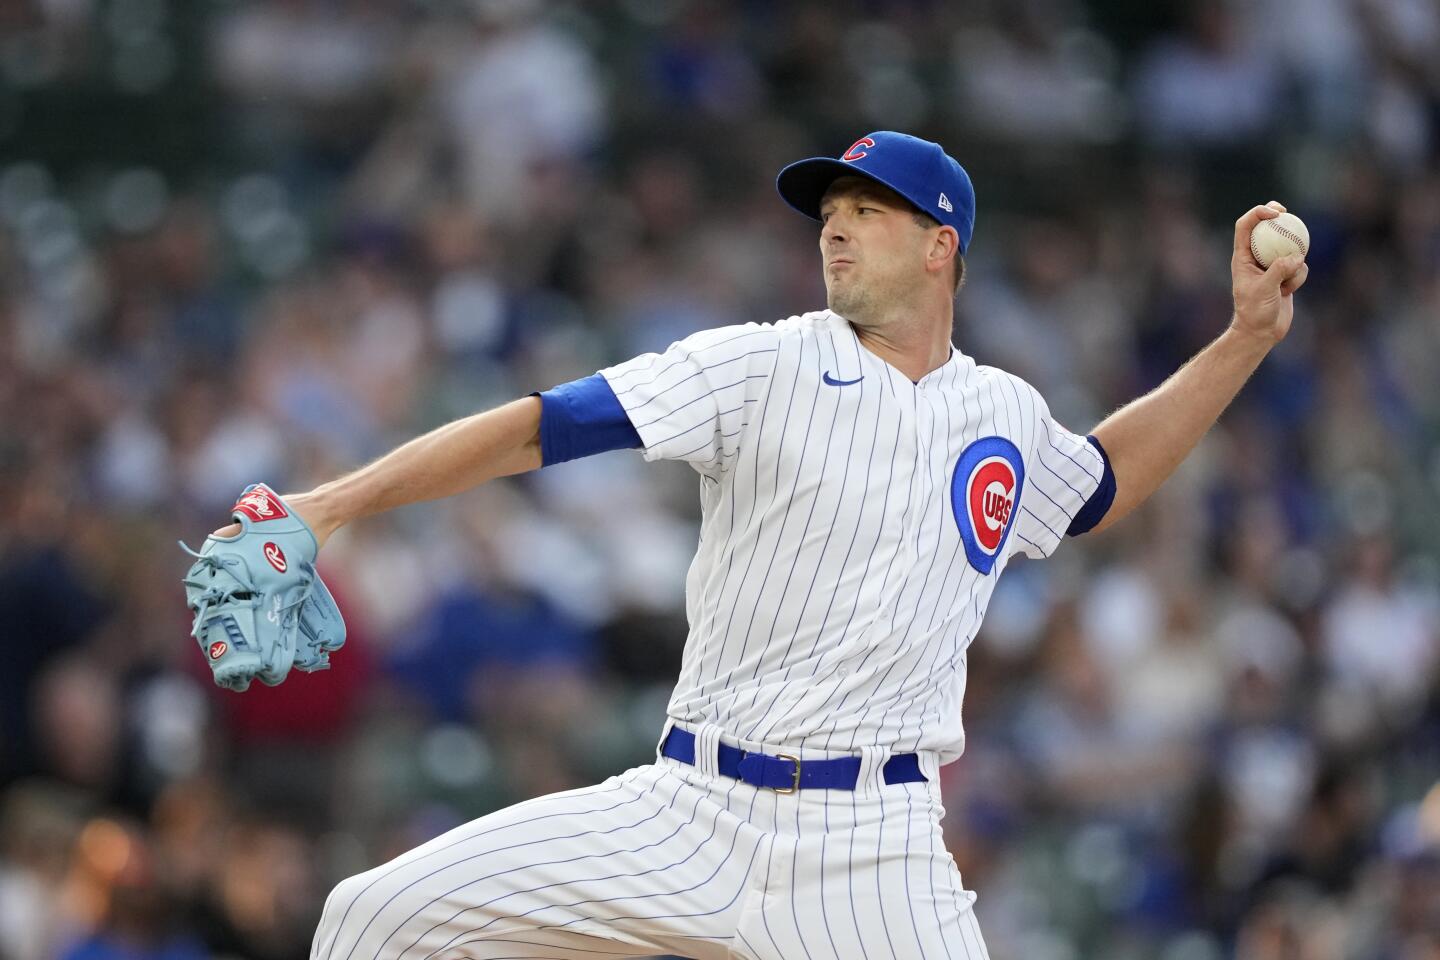 Cubs place LHP Drew Smyly on bereavement list